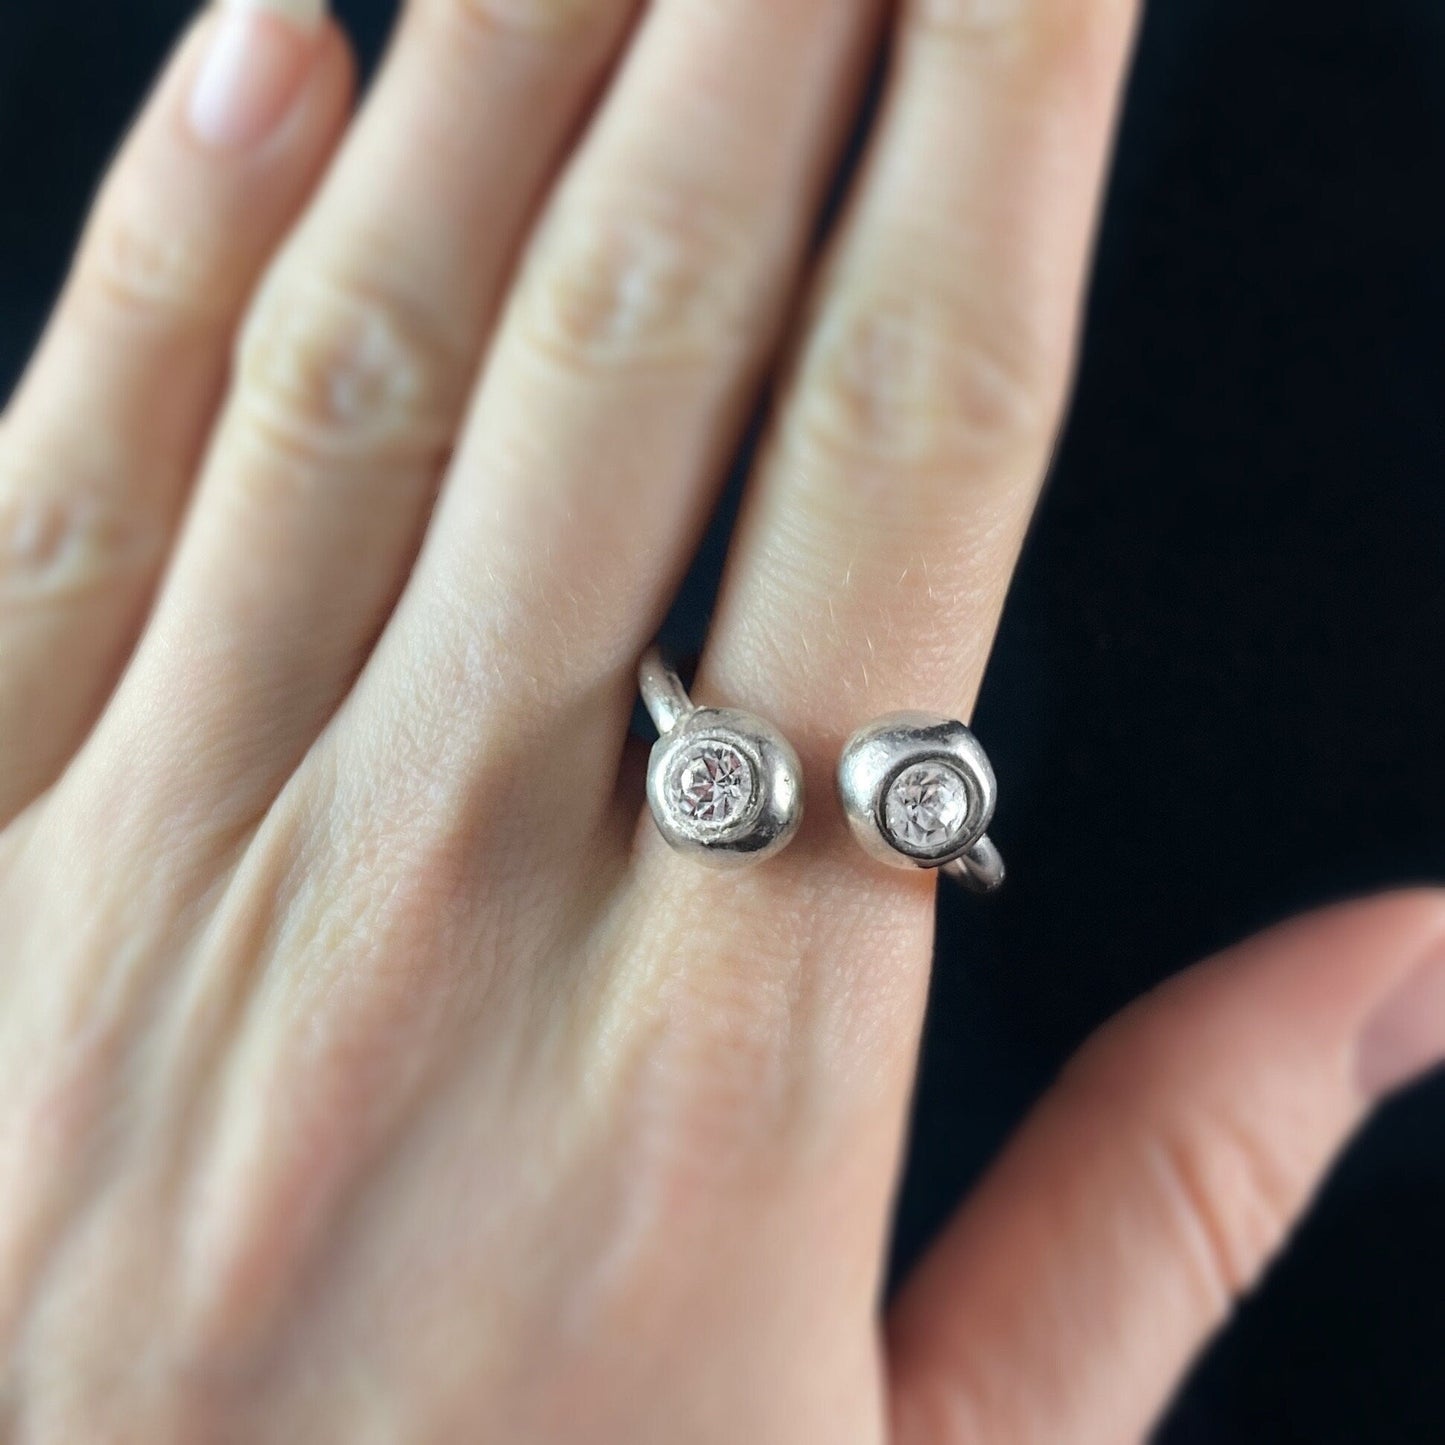 Silver Wrap Ring with Crystal Accents - Handmade Nickel Free Ulla Jewelry